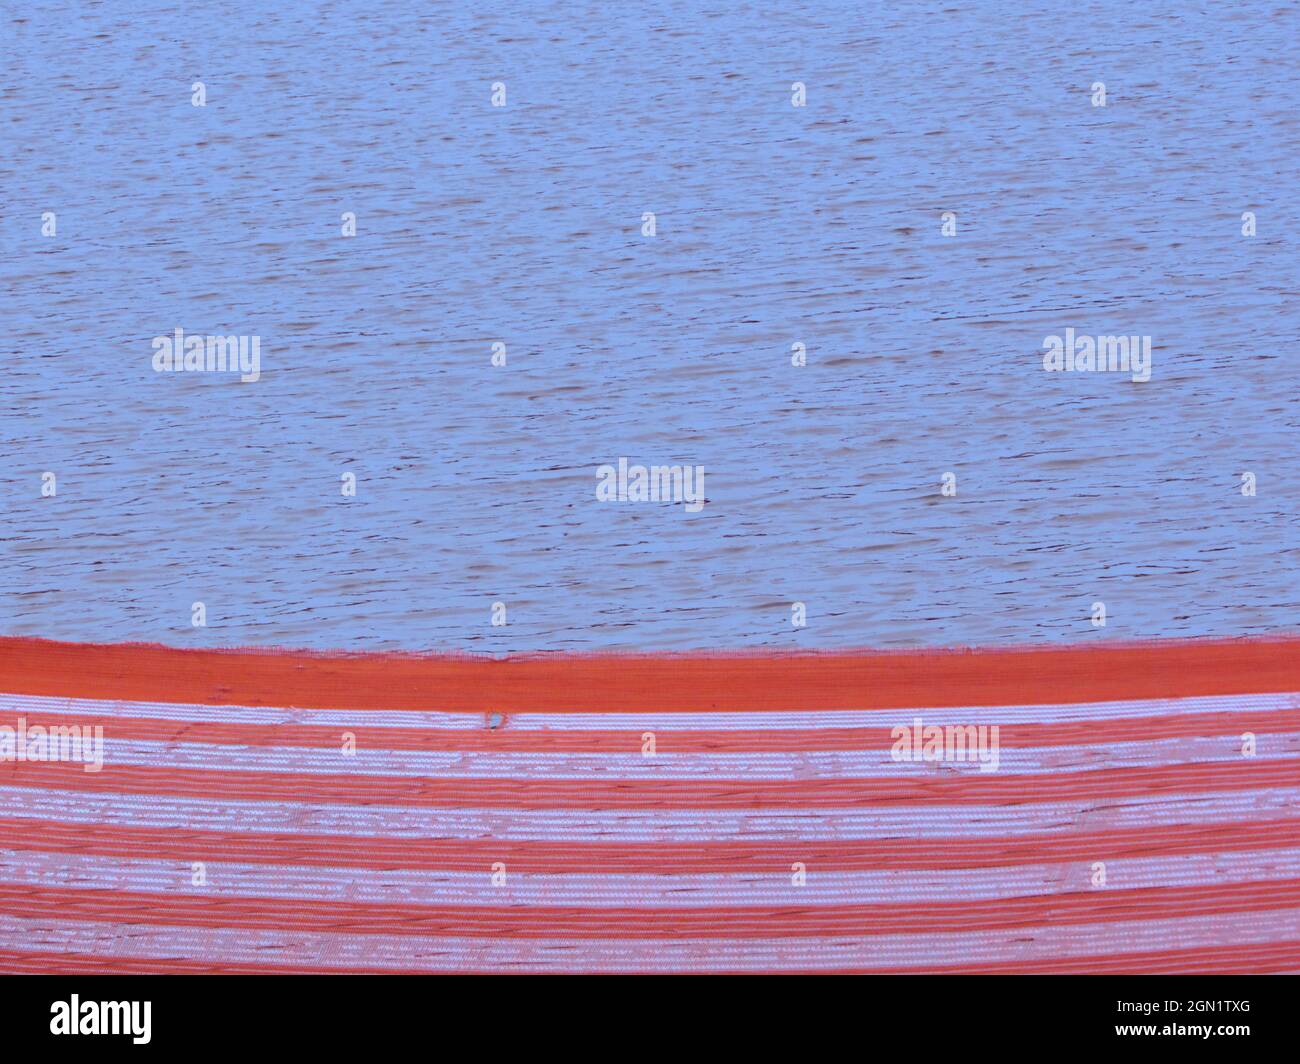 Fluorescent orange and white striped streamer, isolating the lake from users Stock Photo